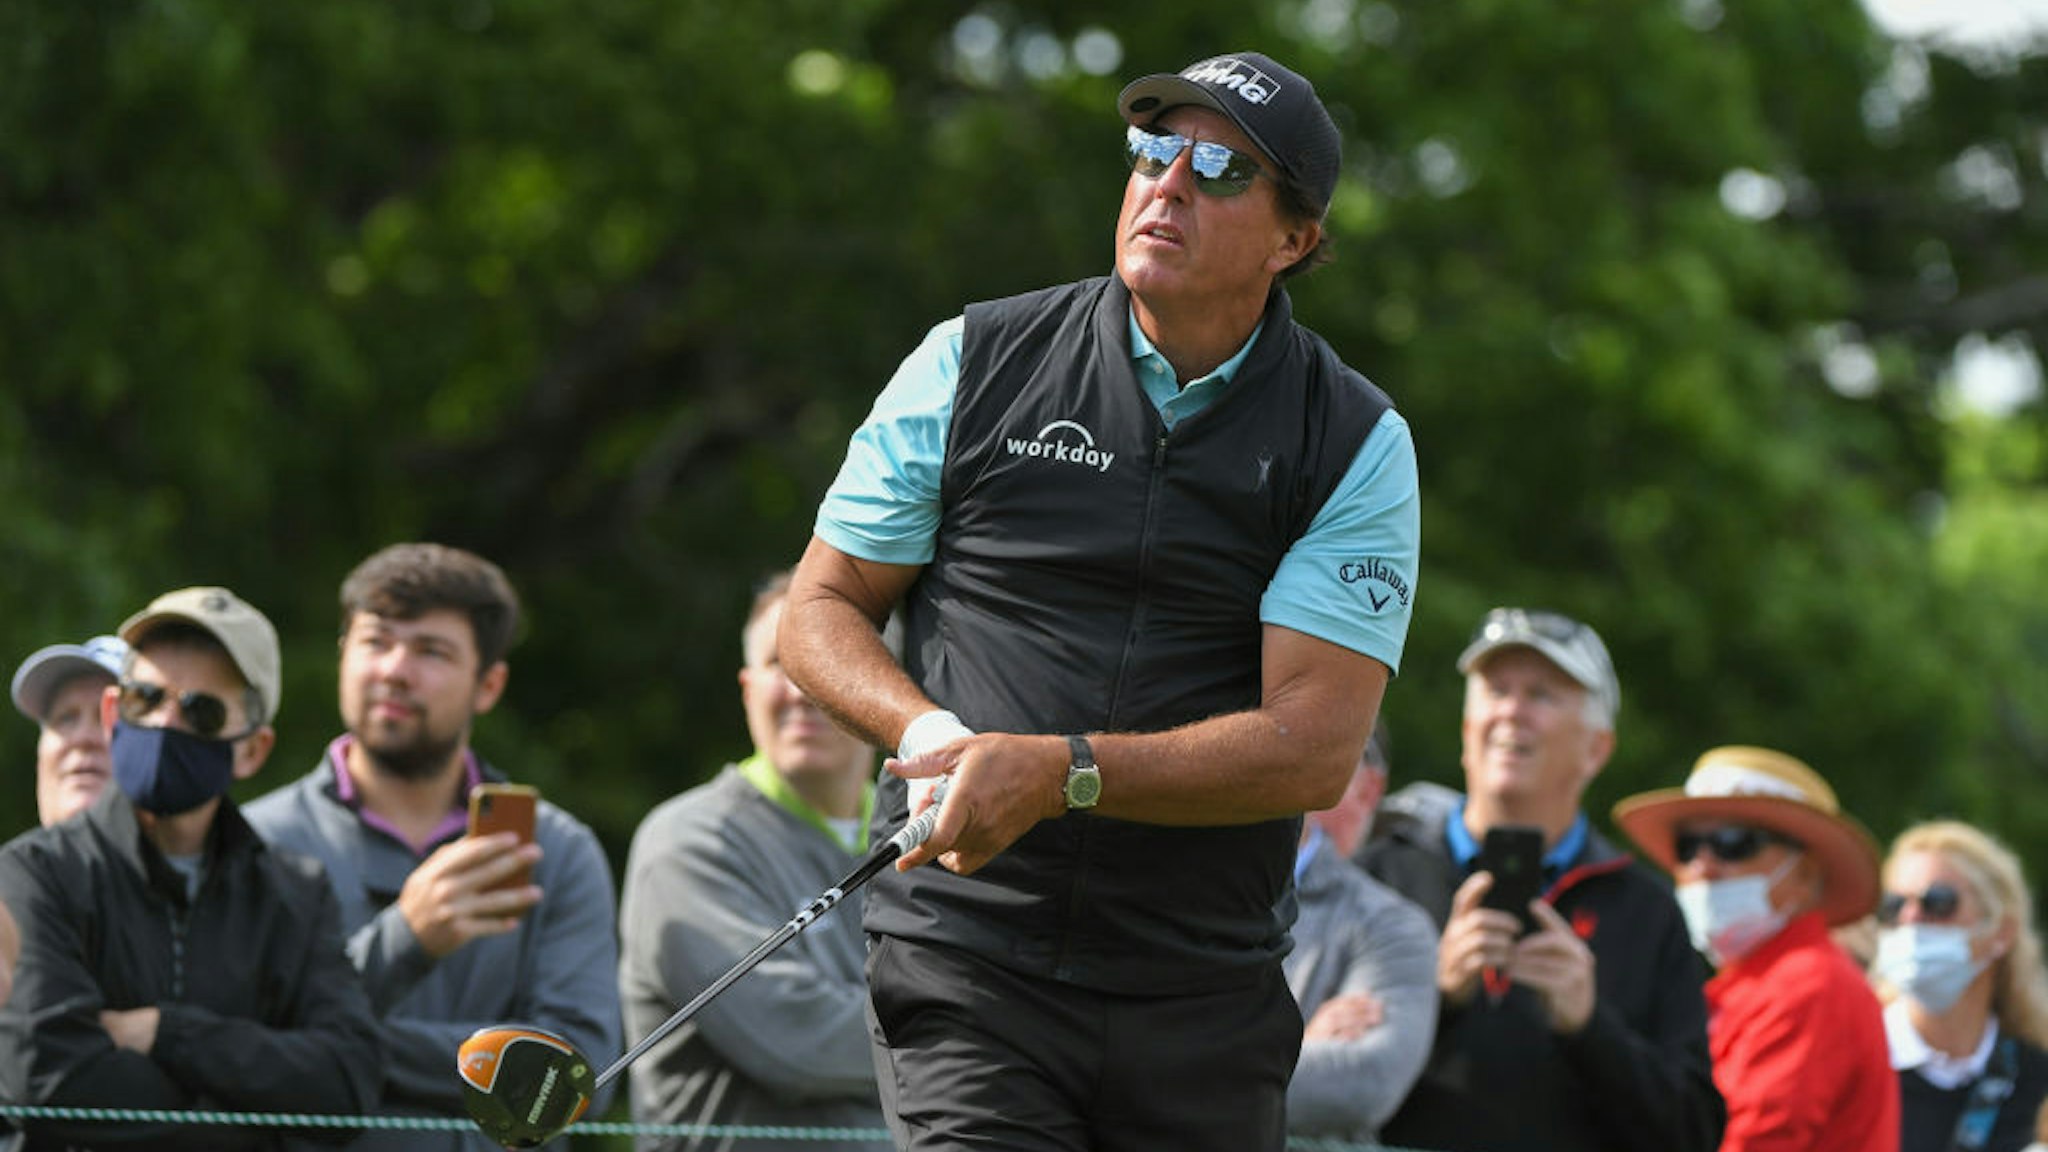 CHARLOTTE, NC - MAY 07: Phil Mickelson plays a tee shot on the ninth hole during the second round of the Wells Fargo Championship at Quail Hollow Club on May 7, 2021 in Charlotte, North Carolina. (Photo by Ben Jared/PGA TOUR via Getty Images)